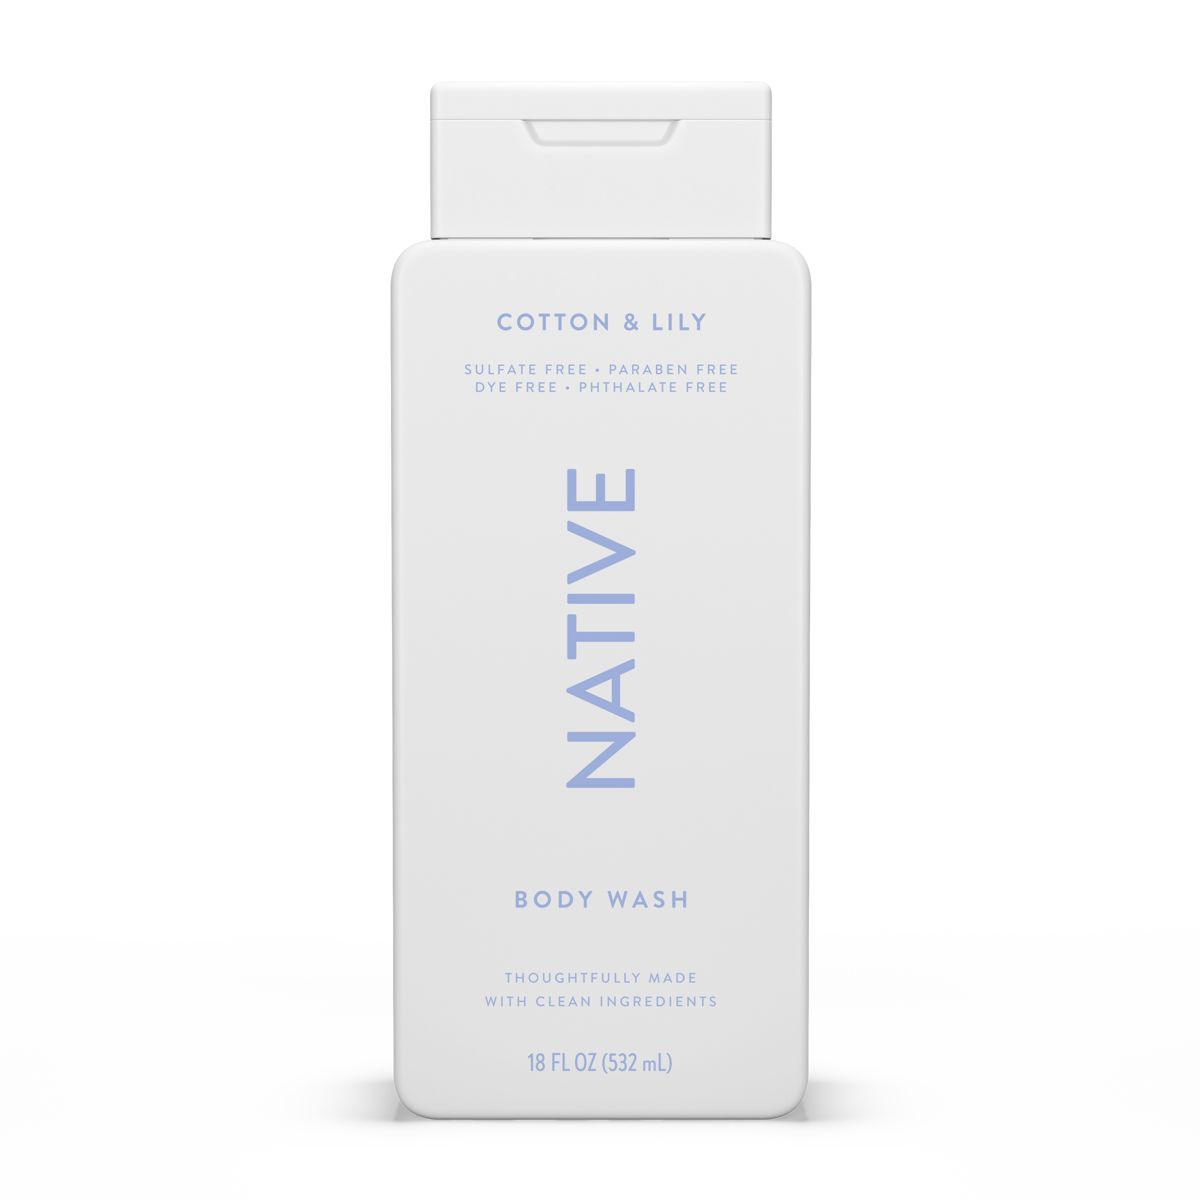 Native Body Wash - Cotton & Lily - Sulfate Free - 18 fl oz | Target